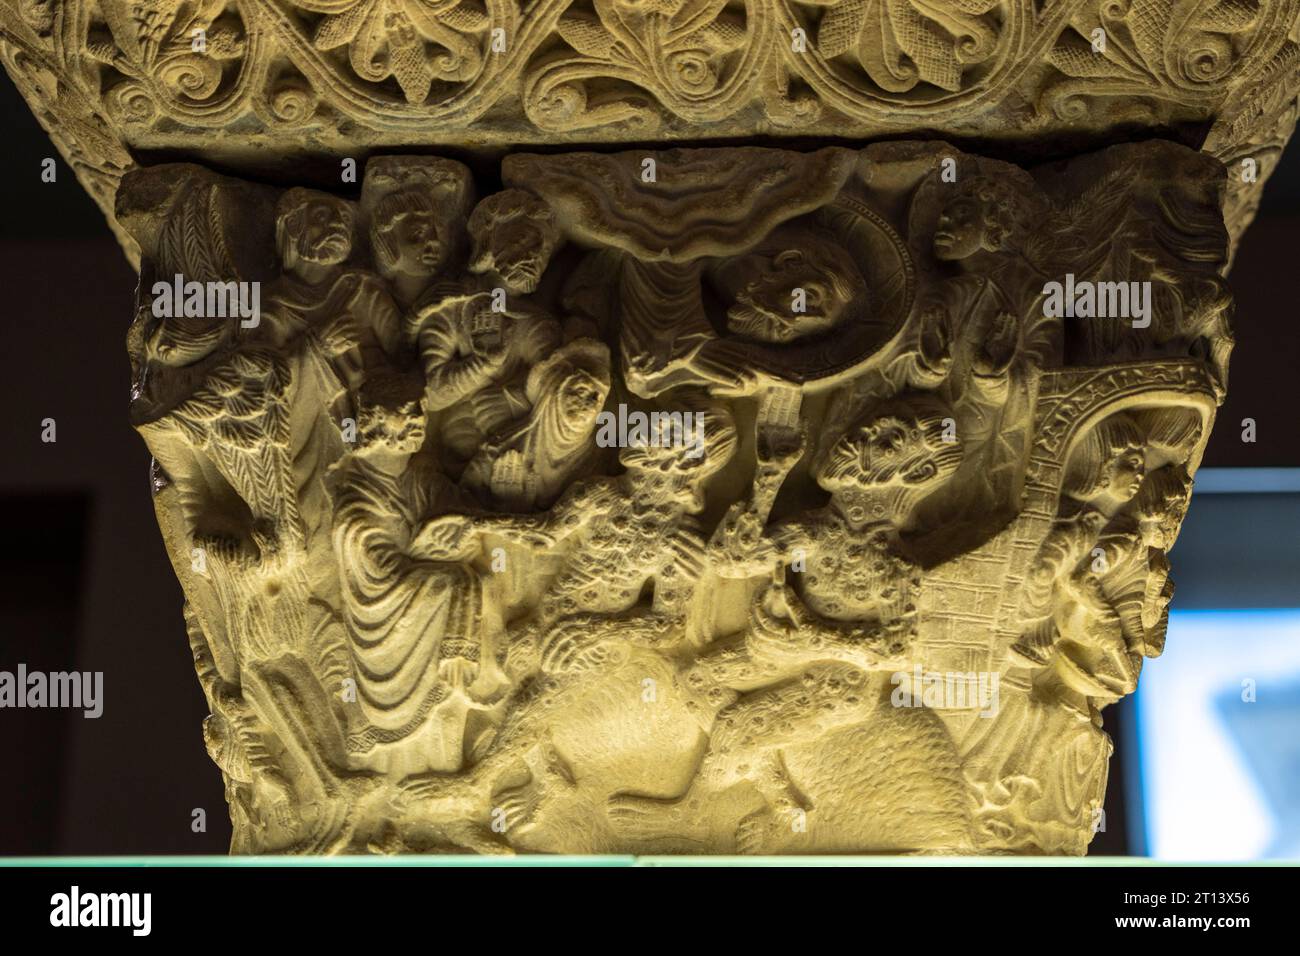 Romanesque capital with scene from the life of Job, 12th century, workshop of the master of the cloister of Pamplona cathedral, Museum of Navarra, Pam Stock Photo